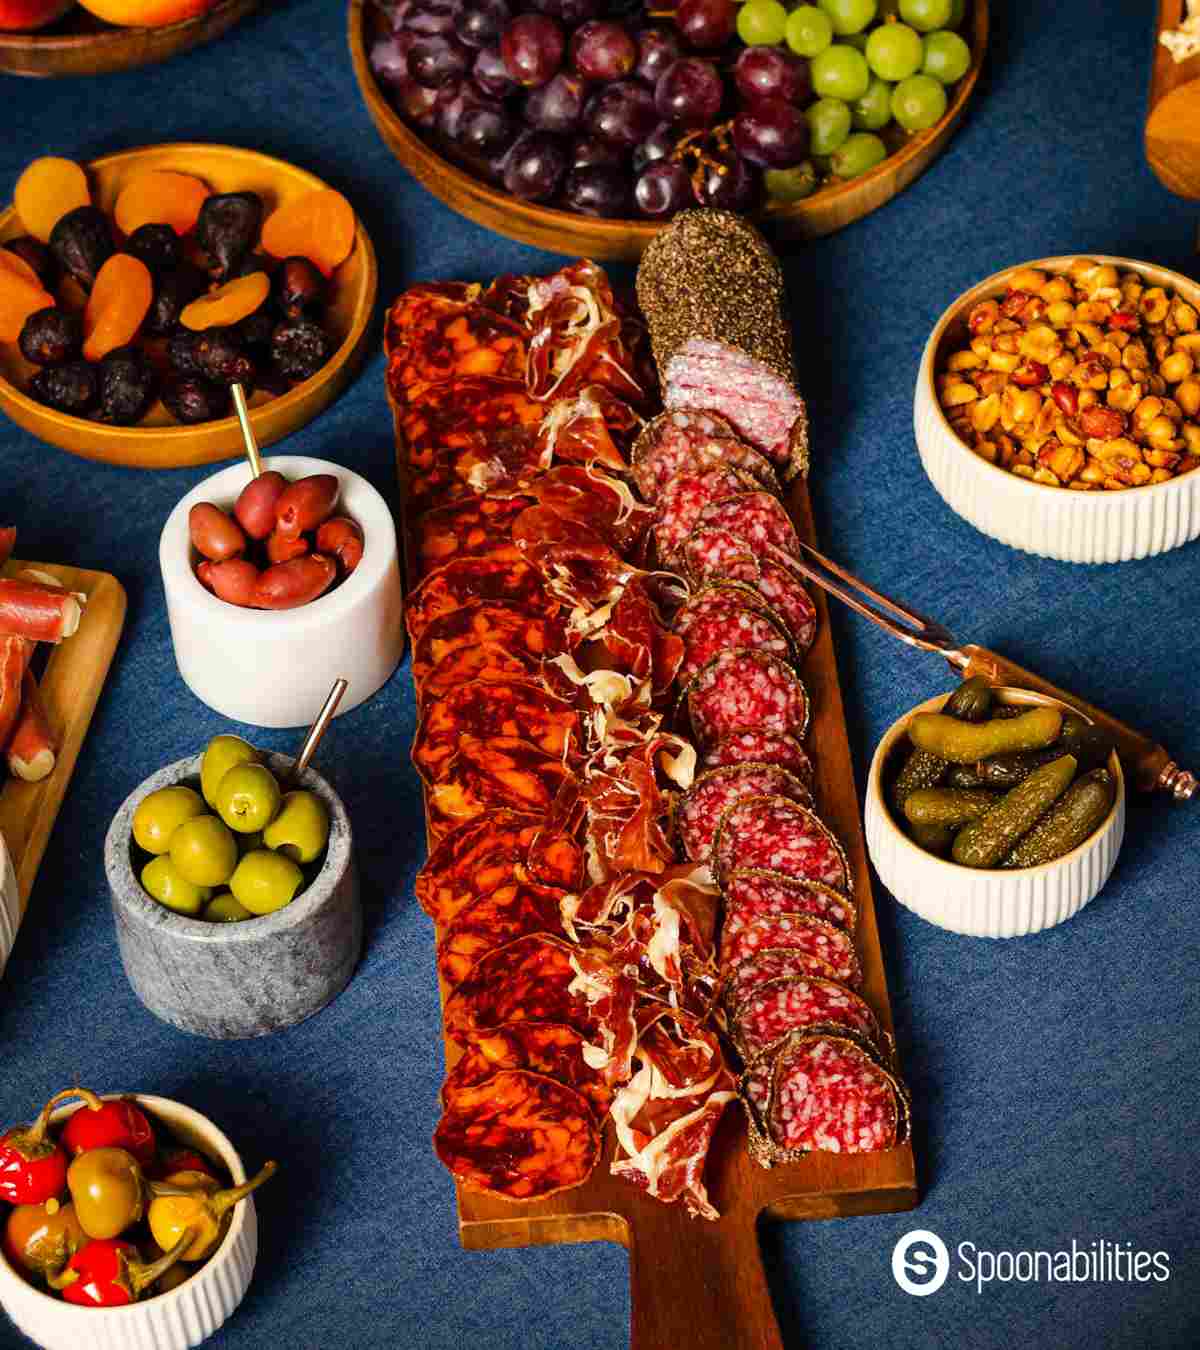 Charcuterie board with meats and produce